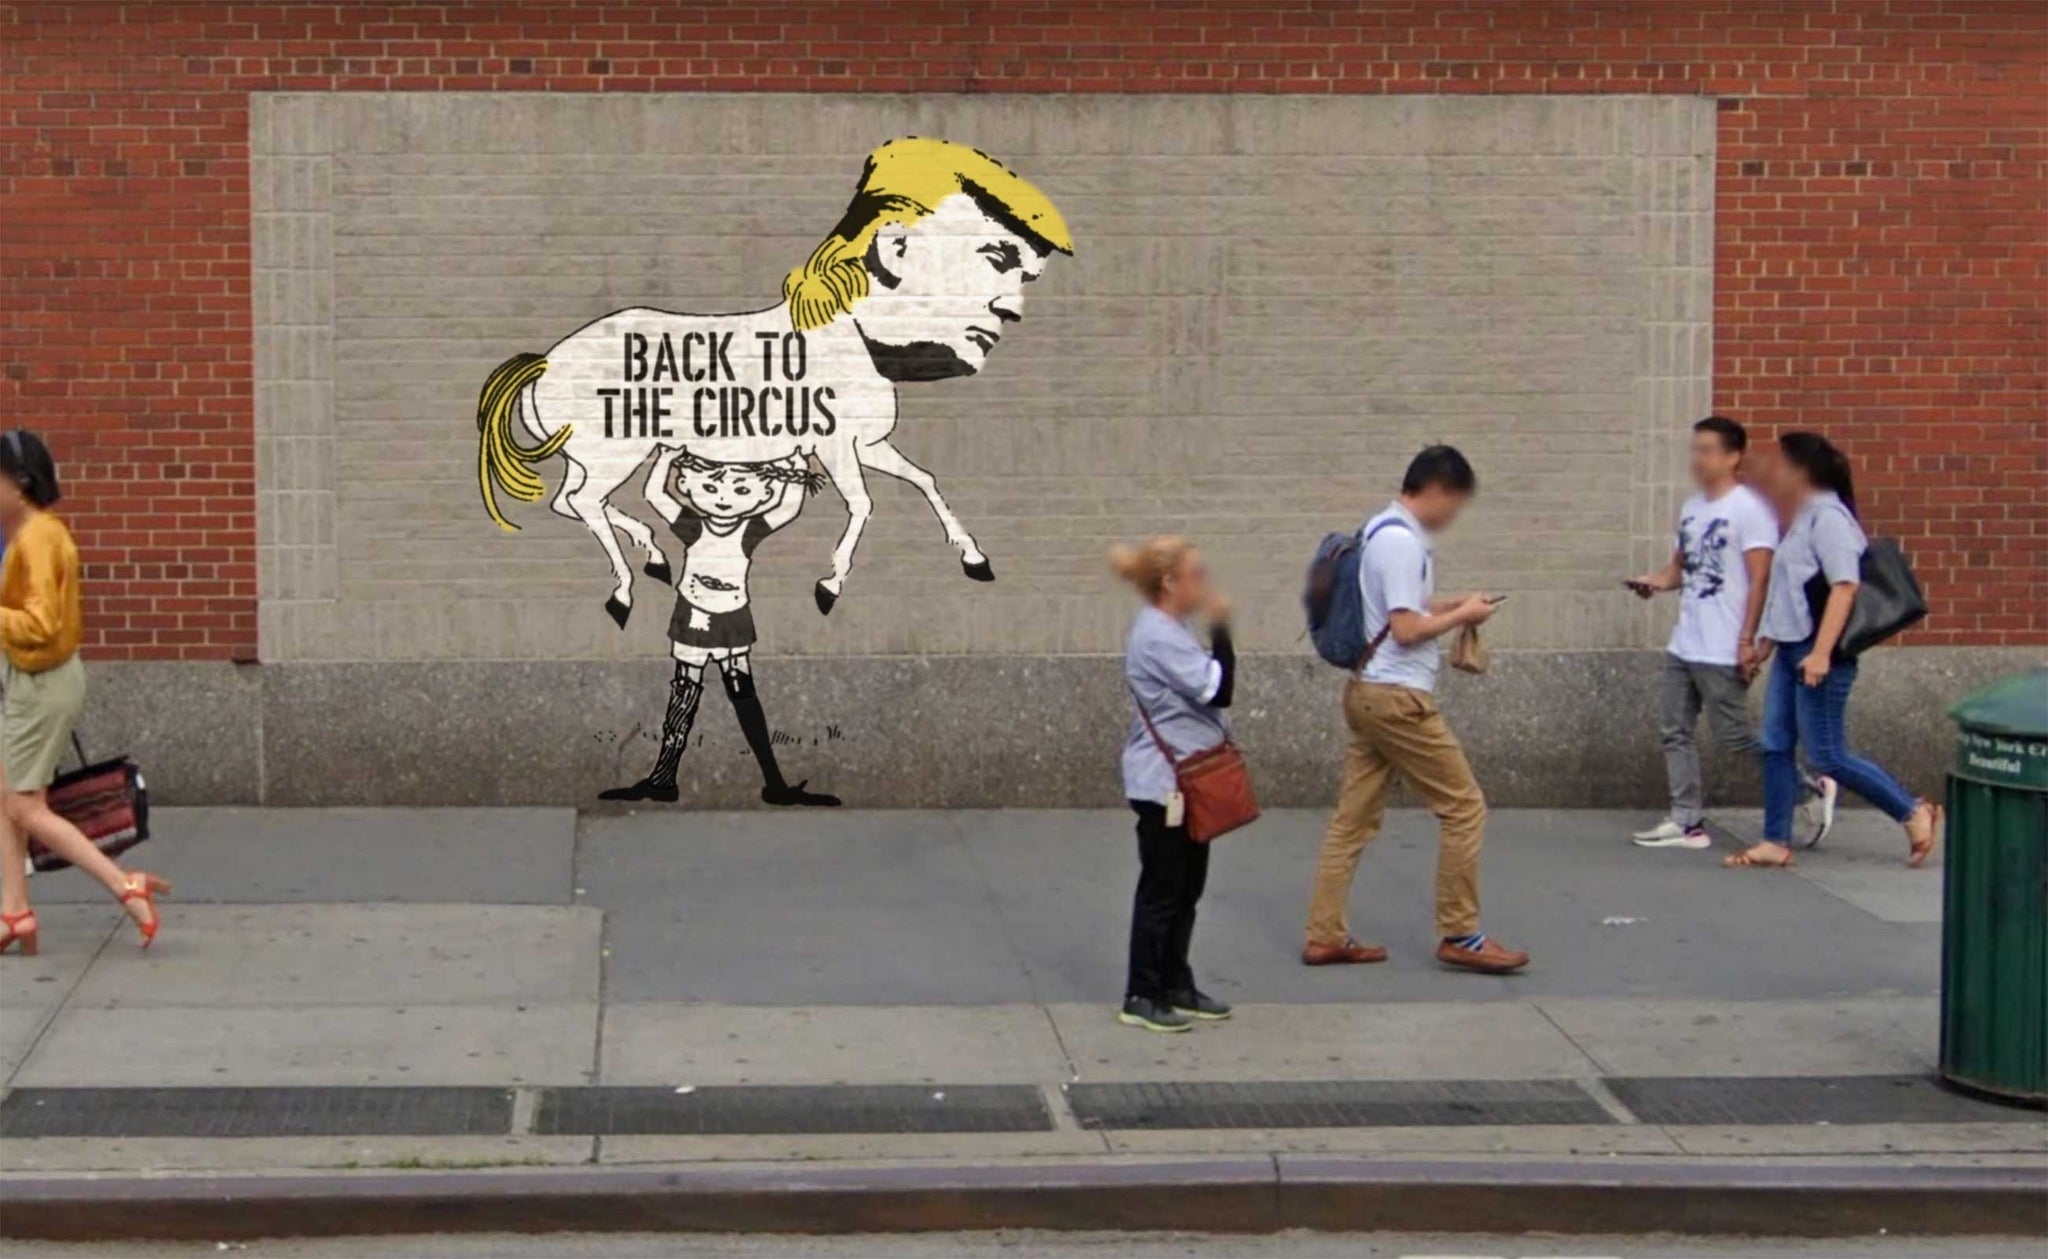 Pippi Longstocking as stret art in NY, holding Donald Trump over her head